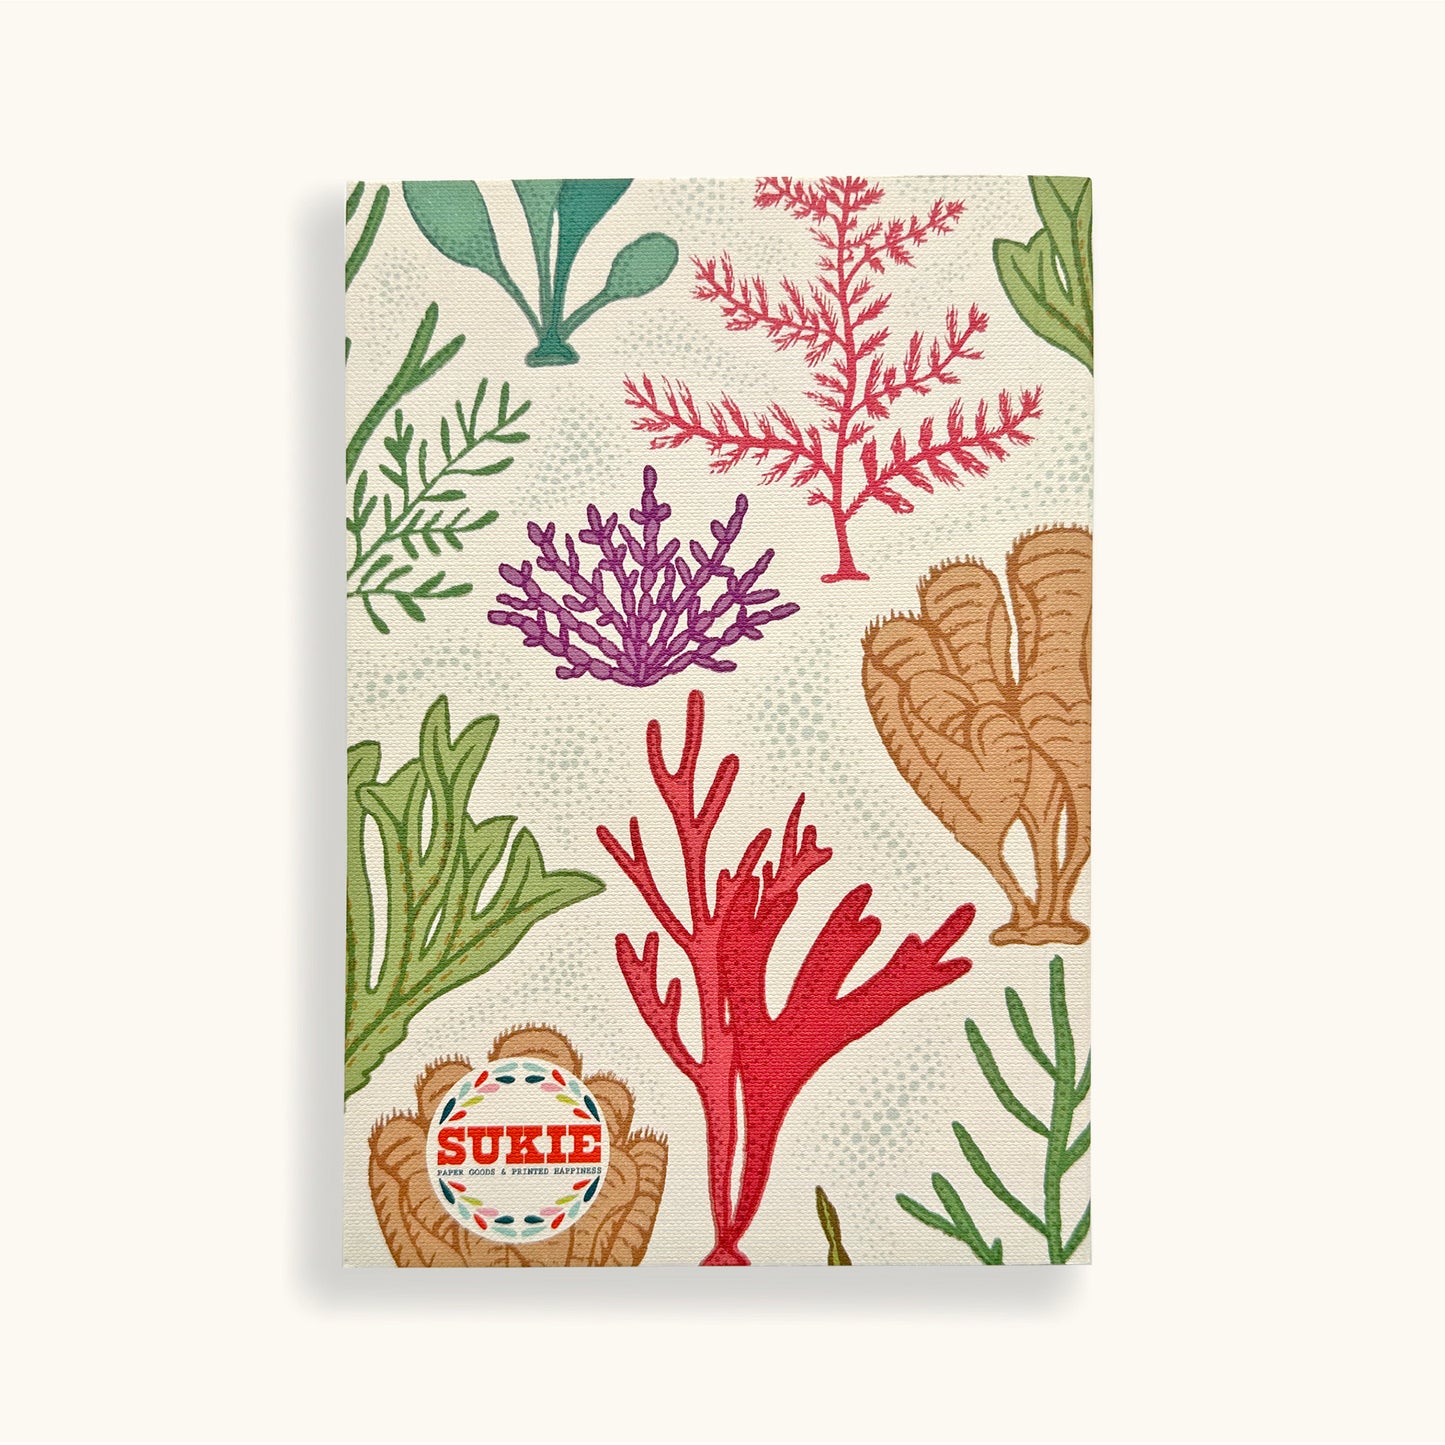 Personalised Notebook With Seaweed Cover - Sukie